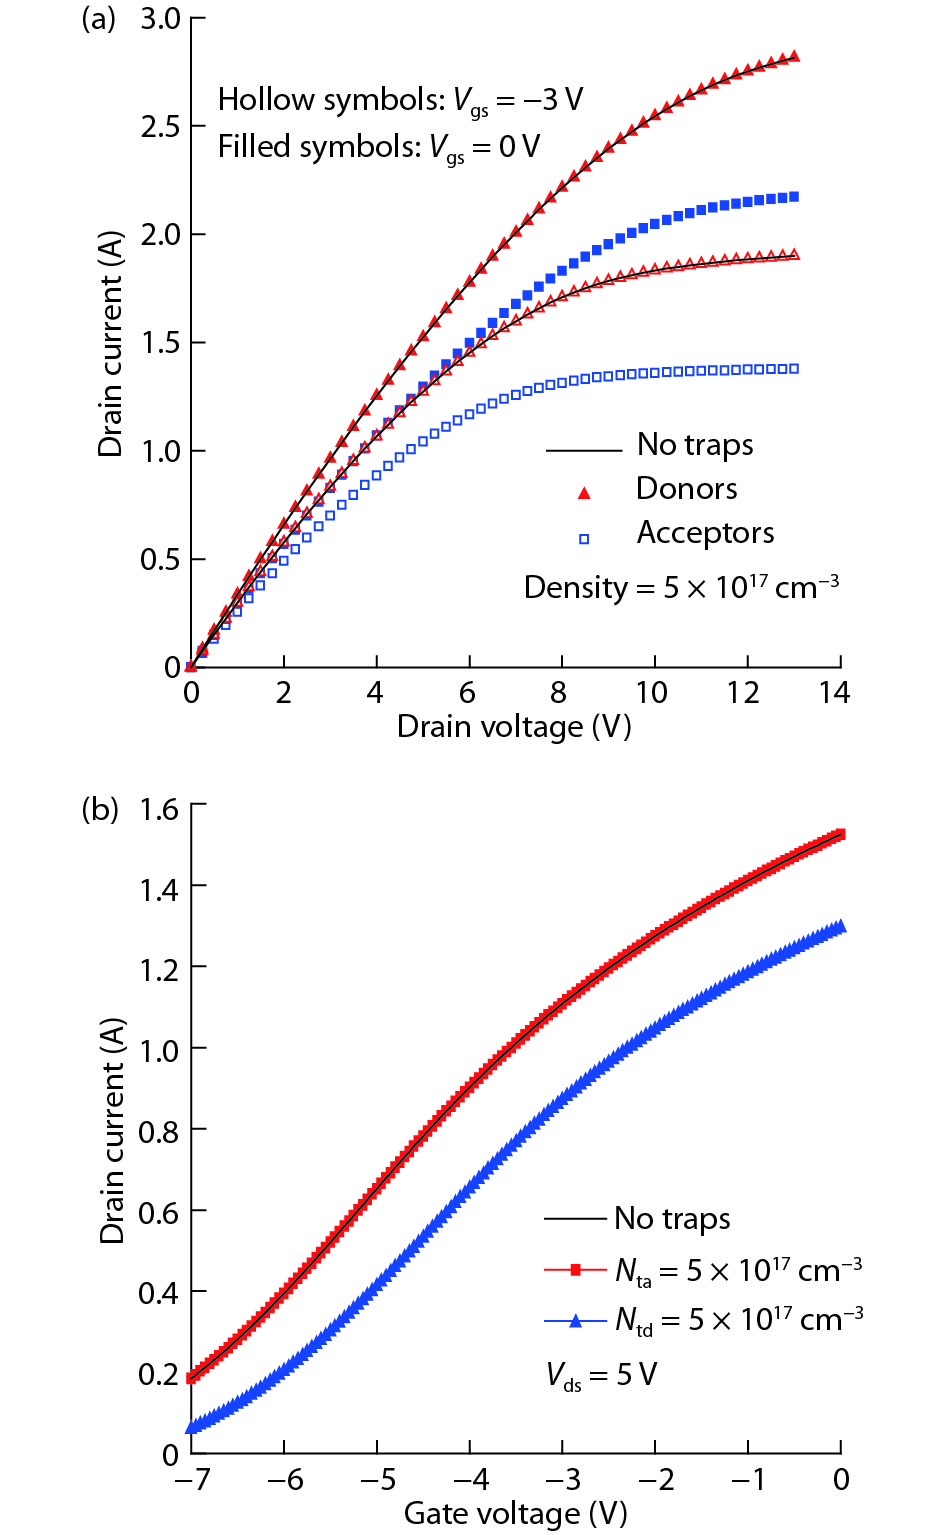 (Color online) Simulated (a) DC characteristics for different gate-source voltages and (b) transfer characteristics in the presence of acceptor and donor traps in the GaN channel compared to the case with no traps. Trap energy level is 0.3 eV below Ec for the acceptor and 0.3 eV above Ev for the donor.